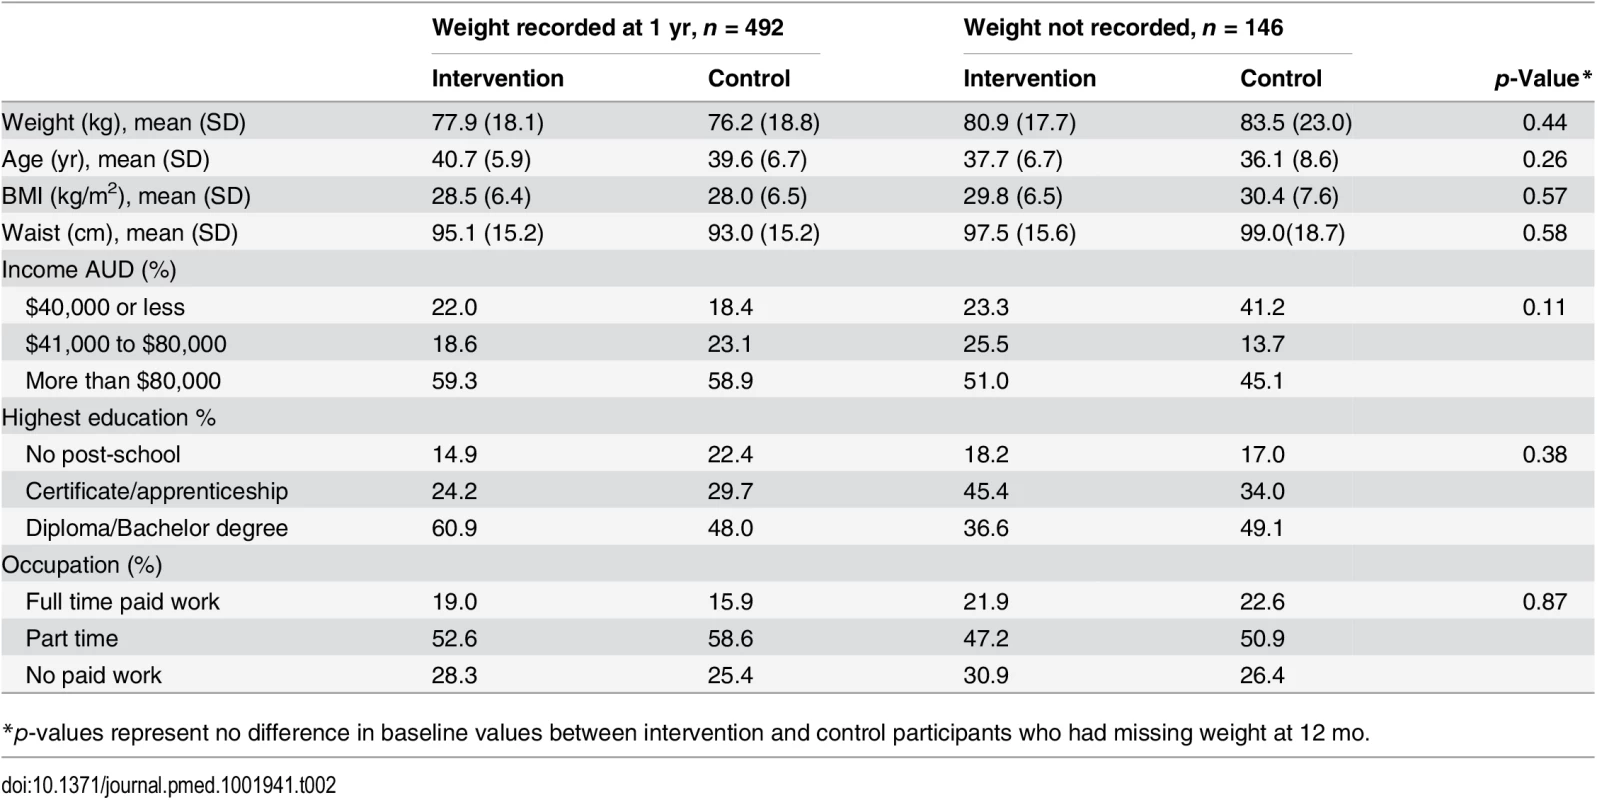 Baseline characteristics of participants with and without weight recorded at 1 year.